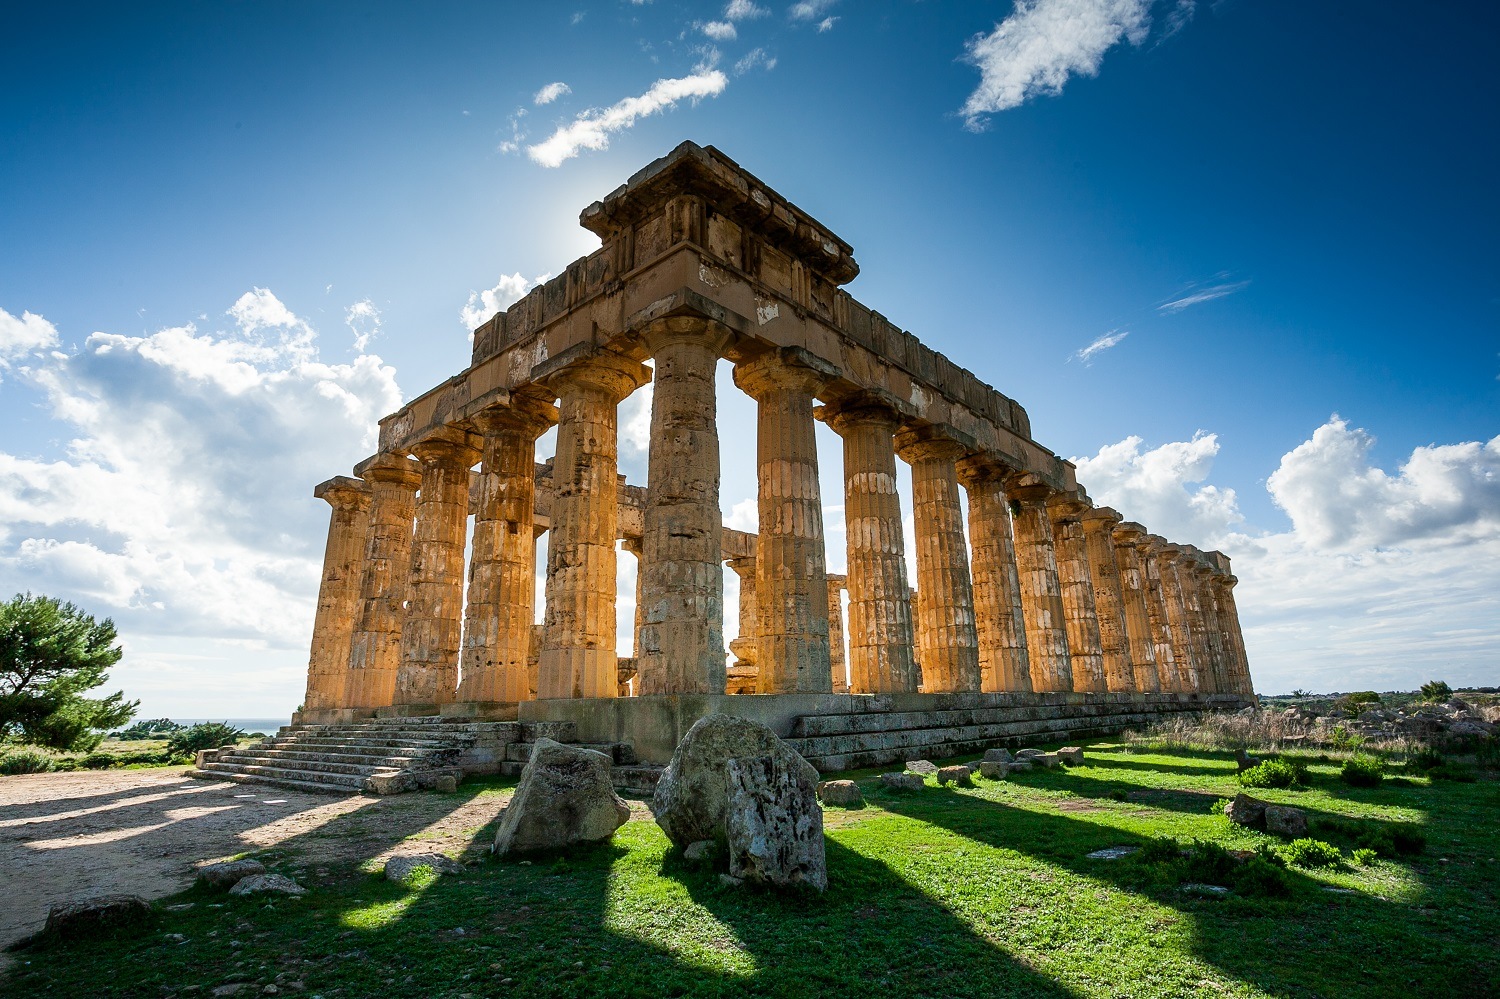 Guided tour of the Selinunte archaeological site - Selinunte, Sicily, Italy